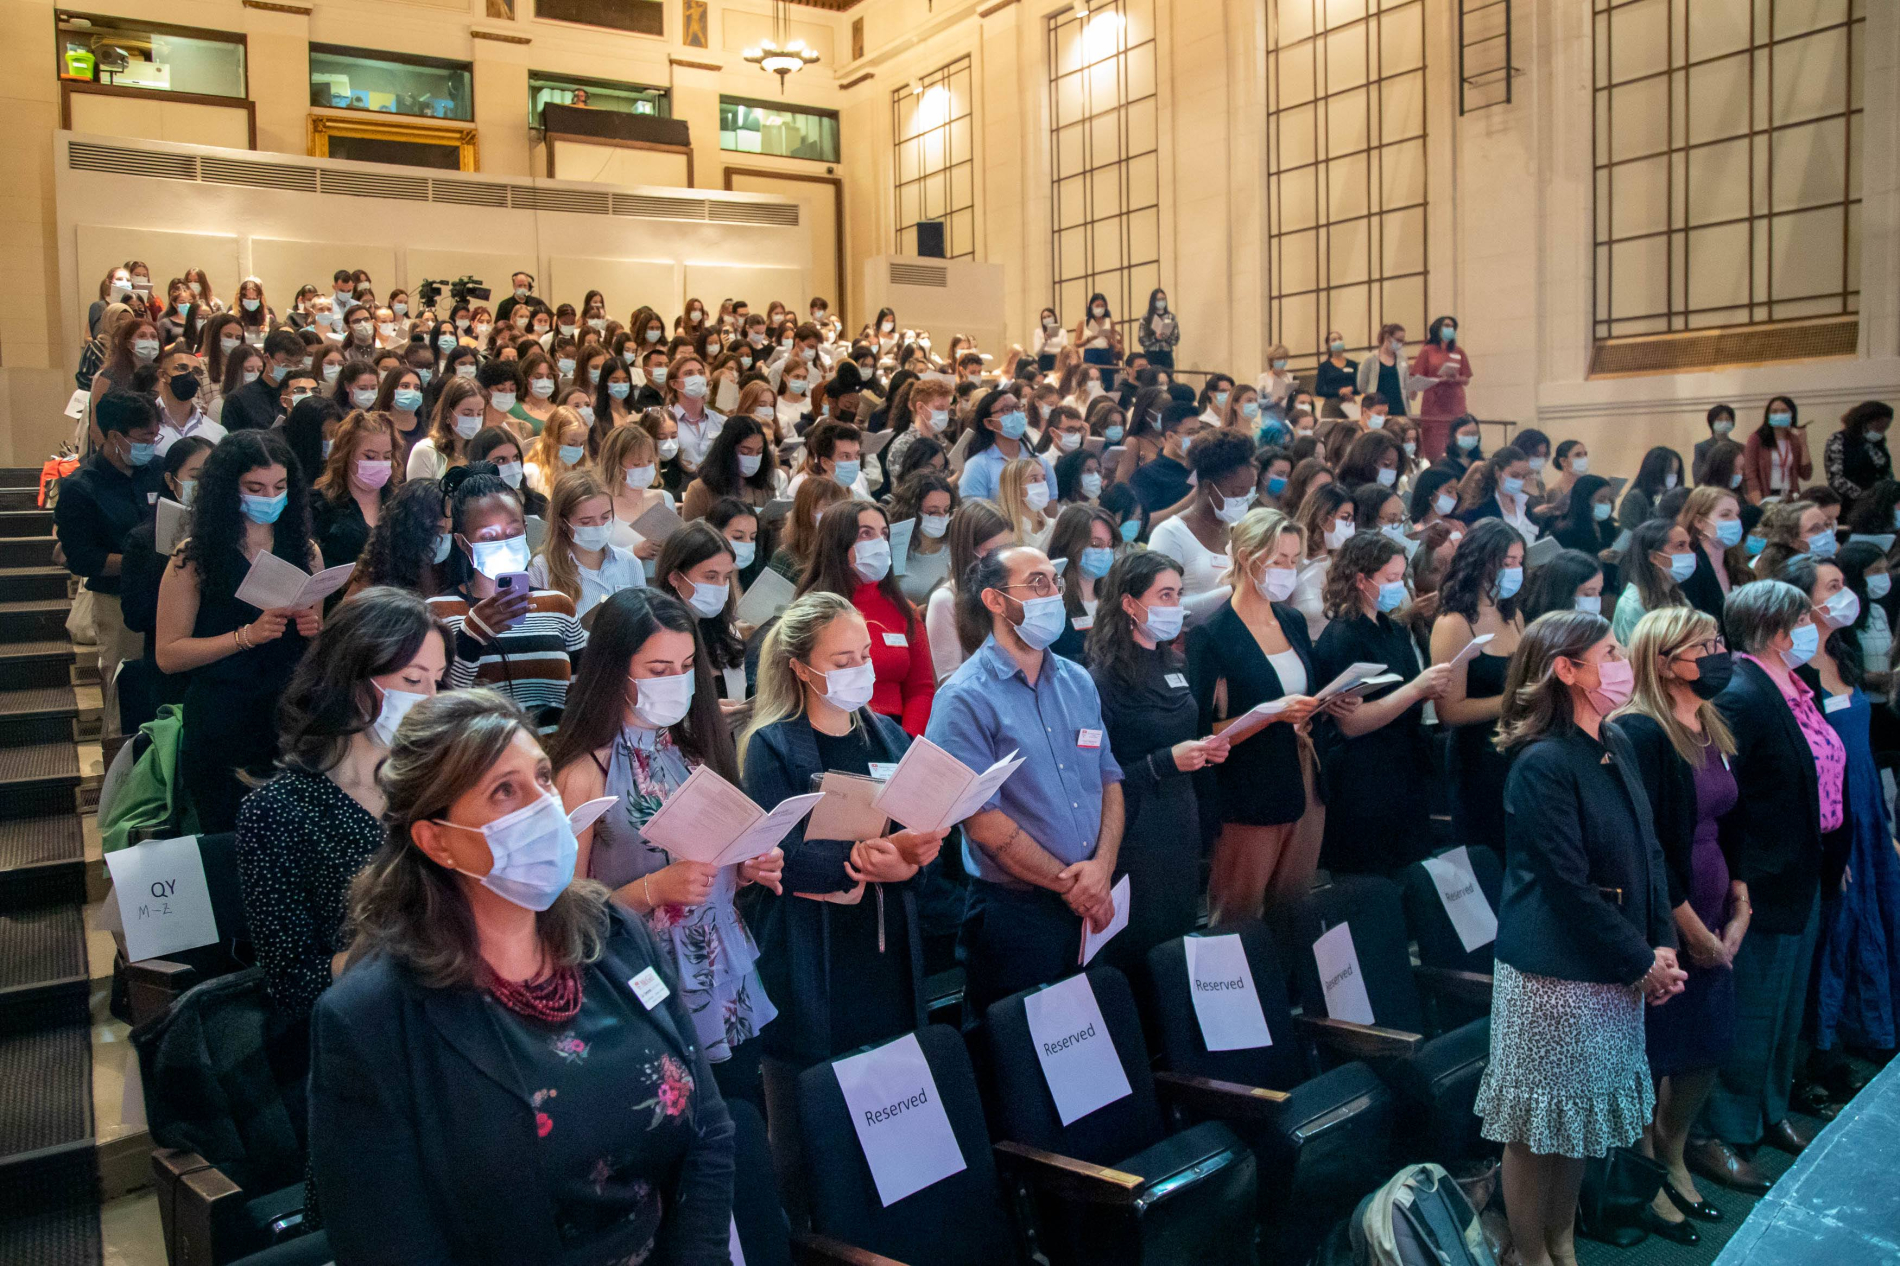 Students recite the oath at the Nursing Professionalism Ceremony